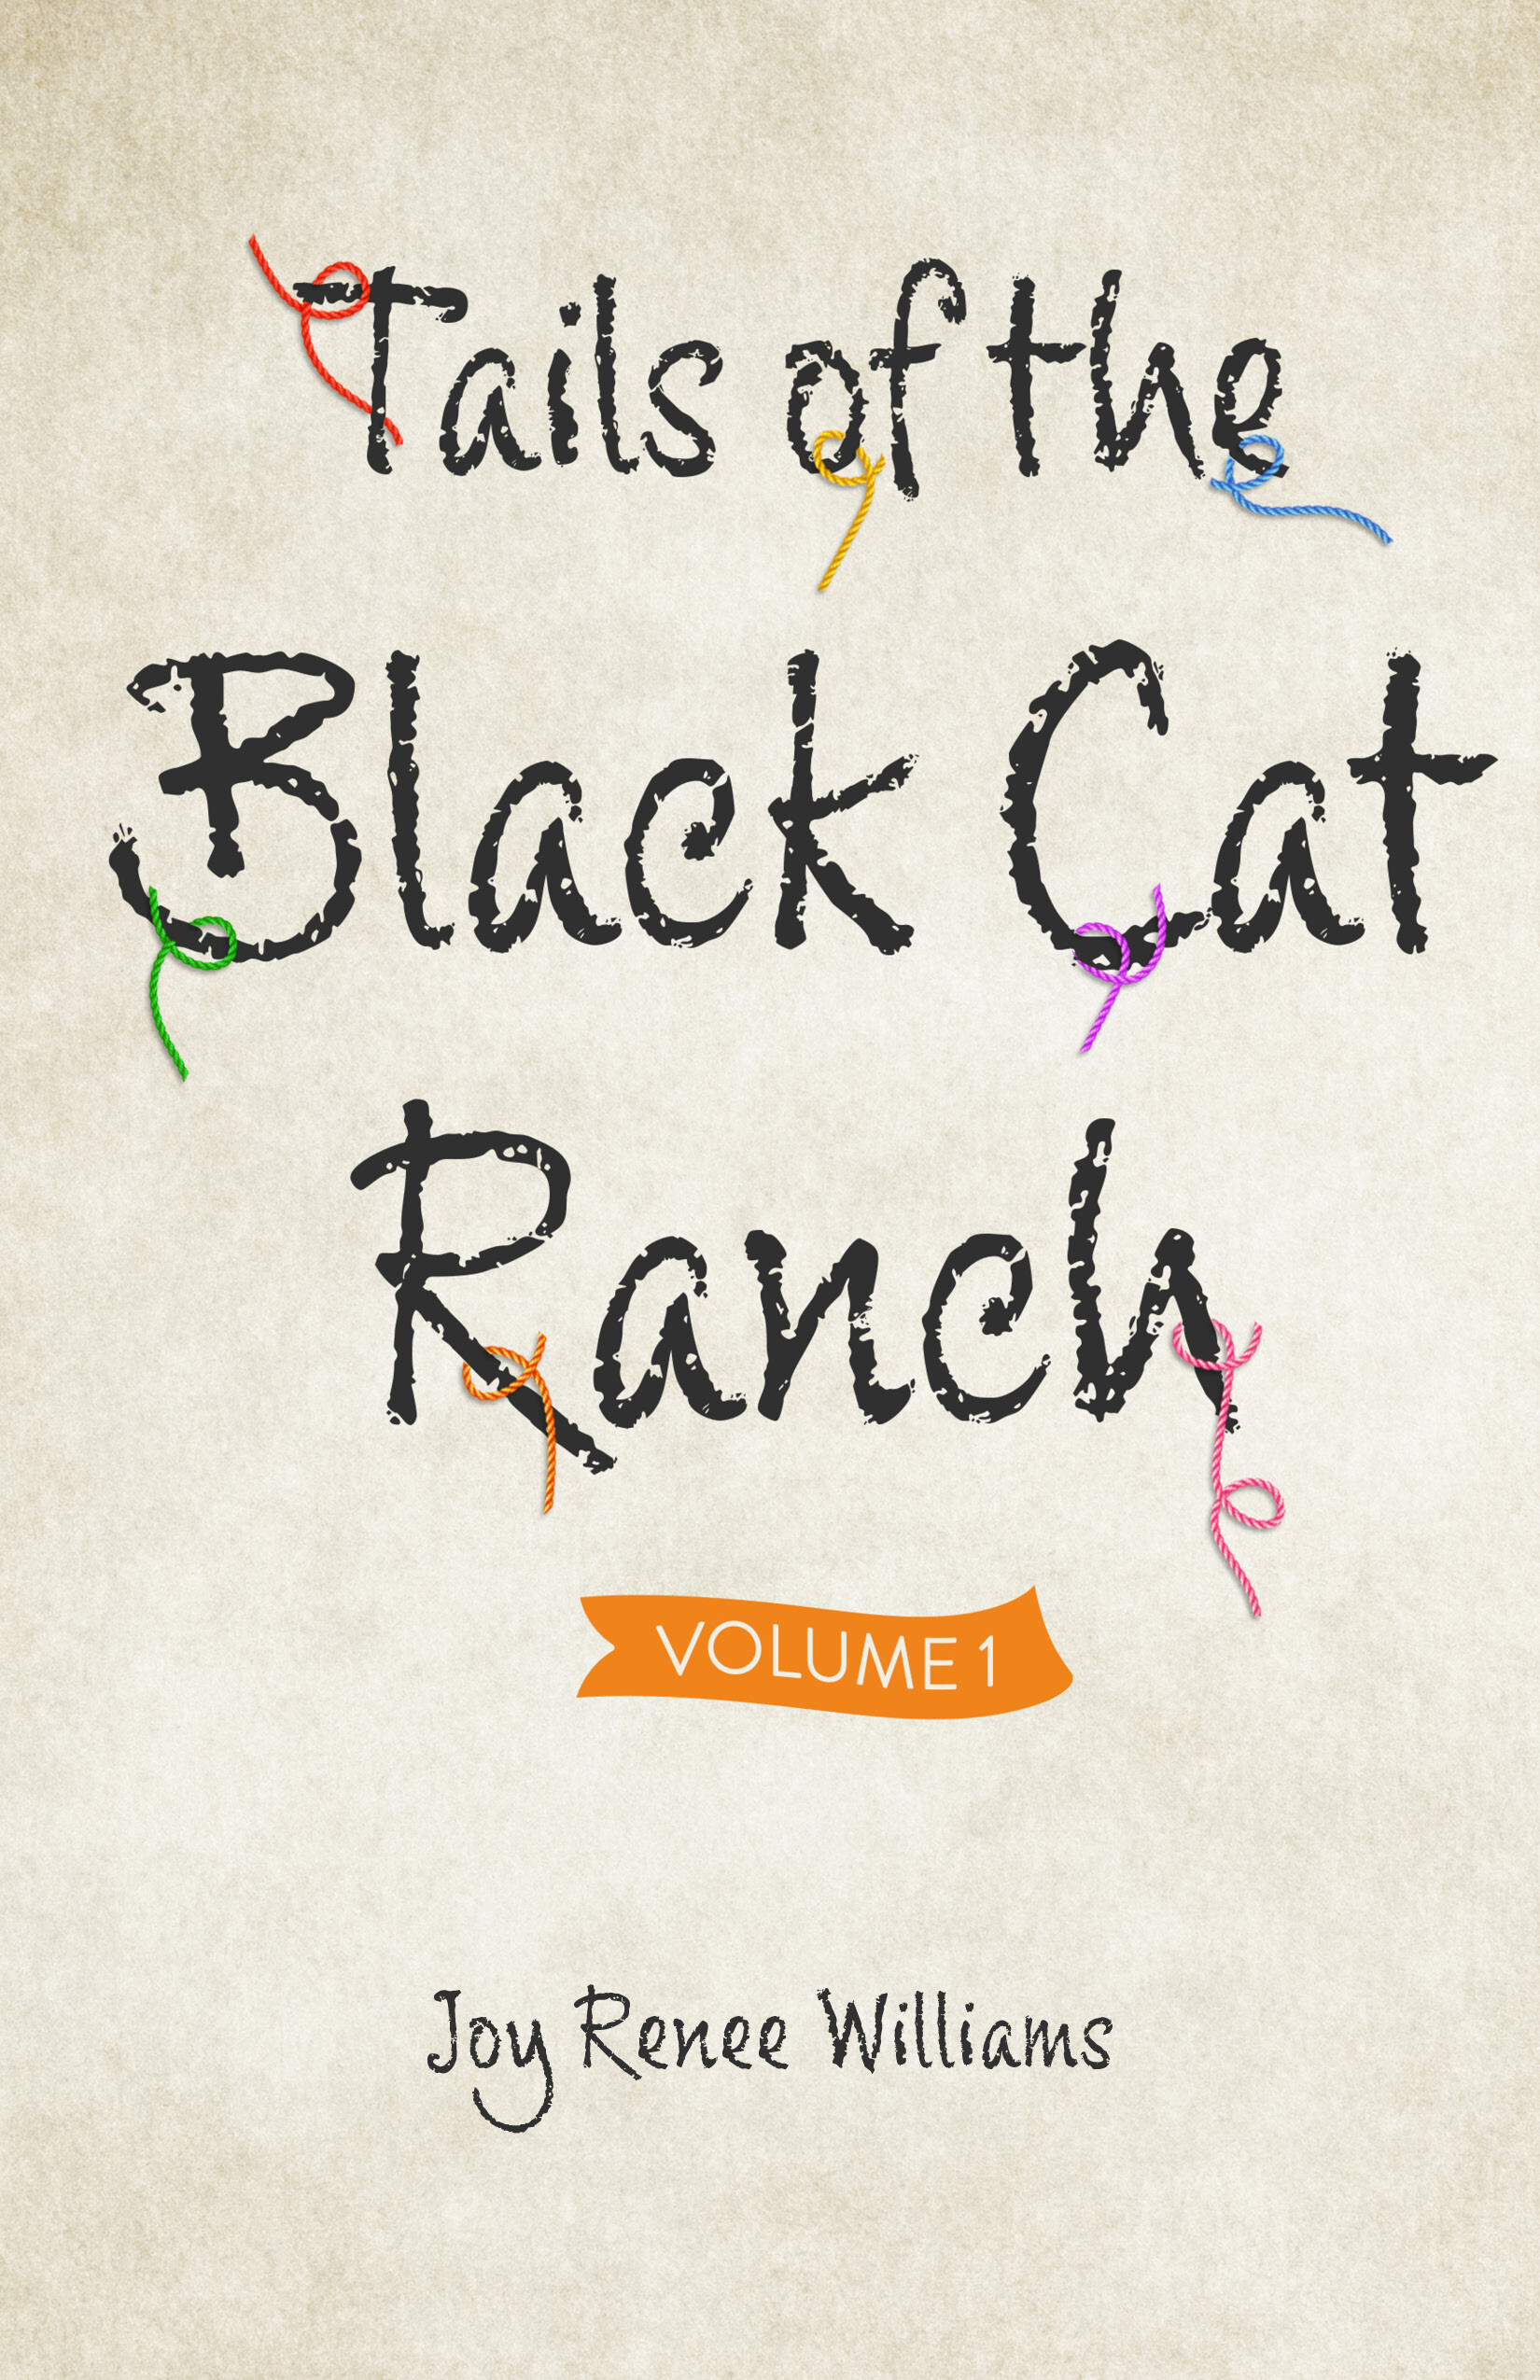 Tails of the Black Cat Ranch